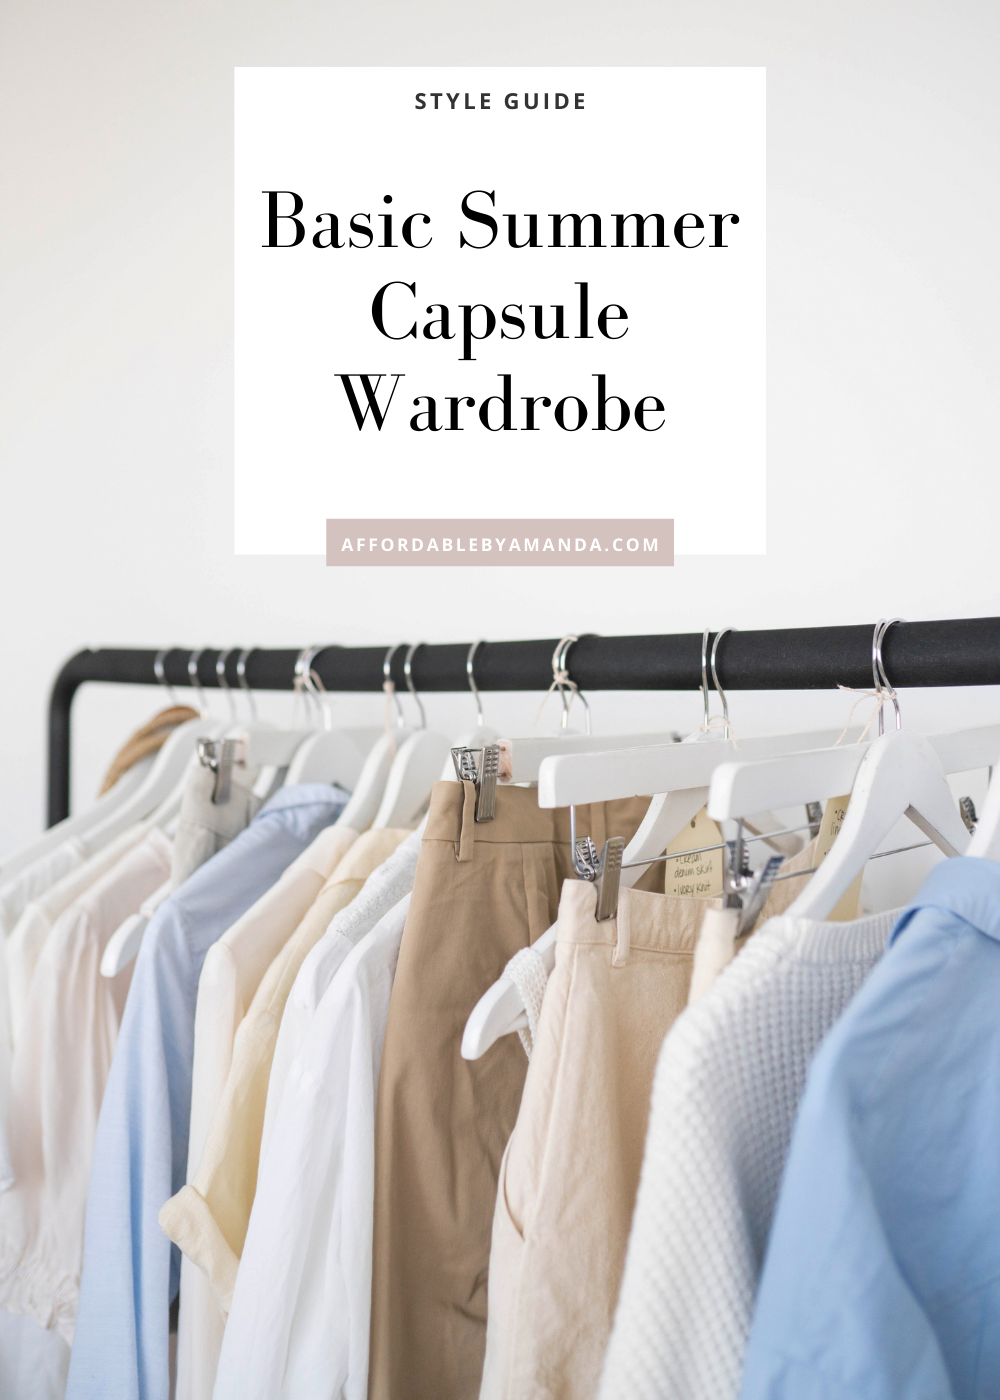 How do you make a summer capsule wardrobe 2022? Complete Guide To Making a Basic Summer Capsule Wardrobe for 2022.